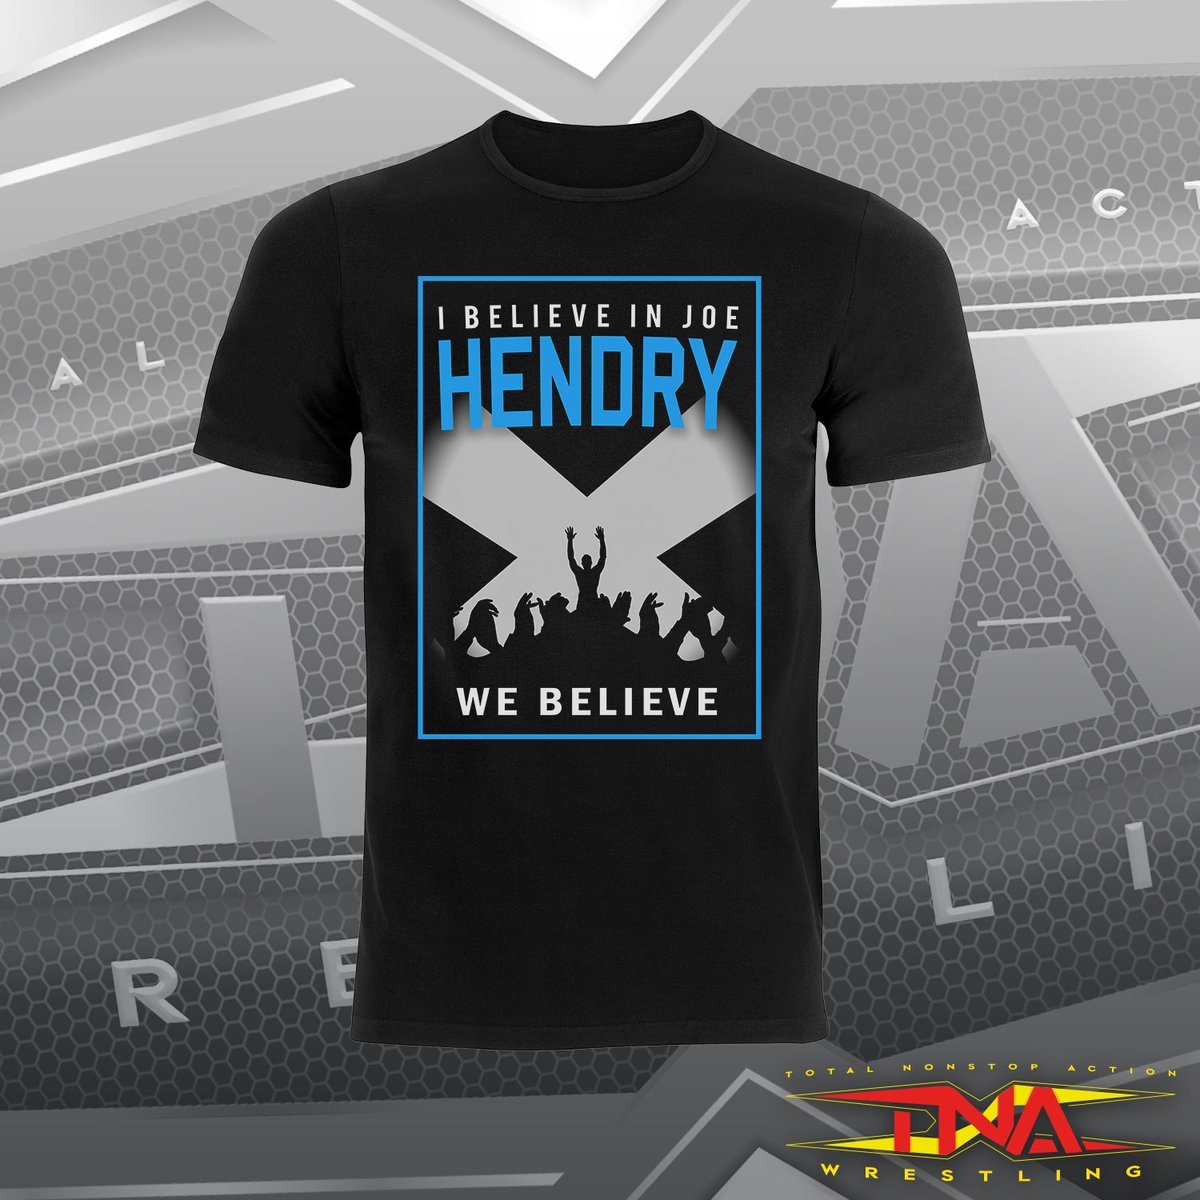 Can't wait to get the new @joehendry @ThisIsTNA #tnawrestling shirt 
#ibelieve #webeileve